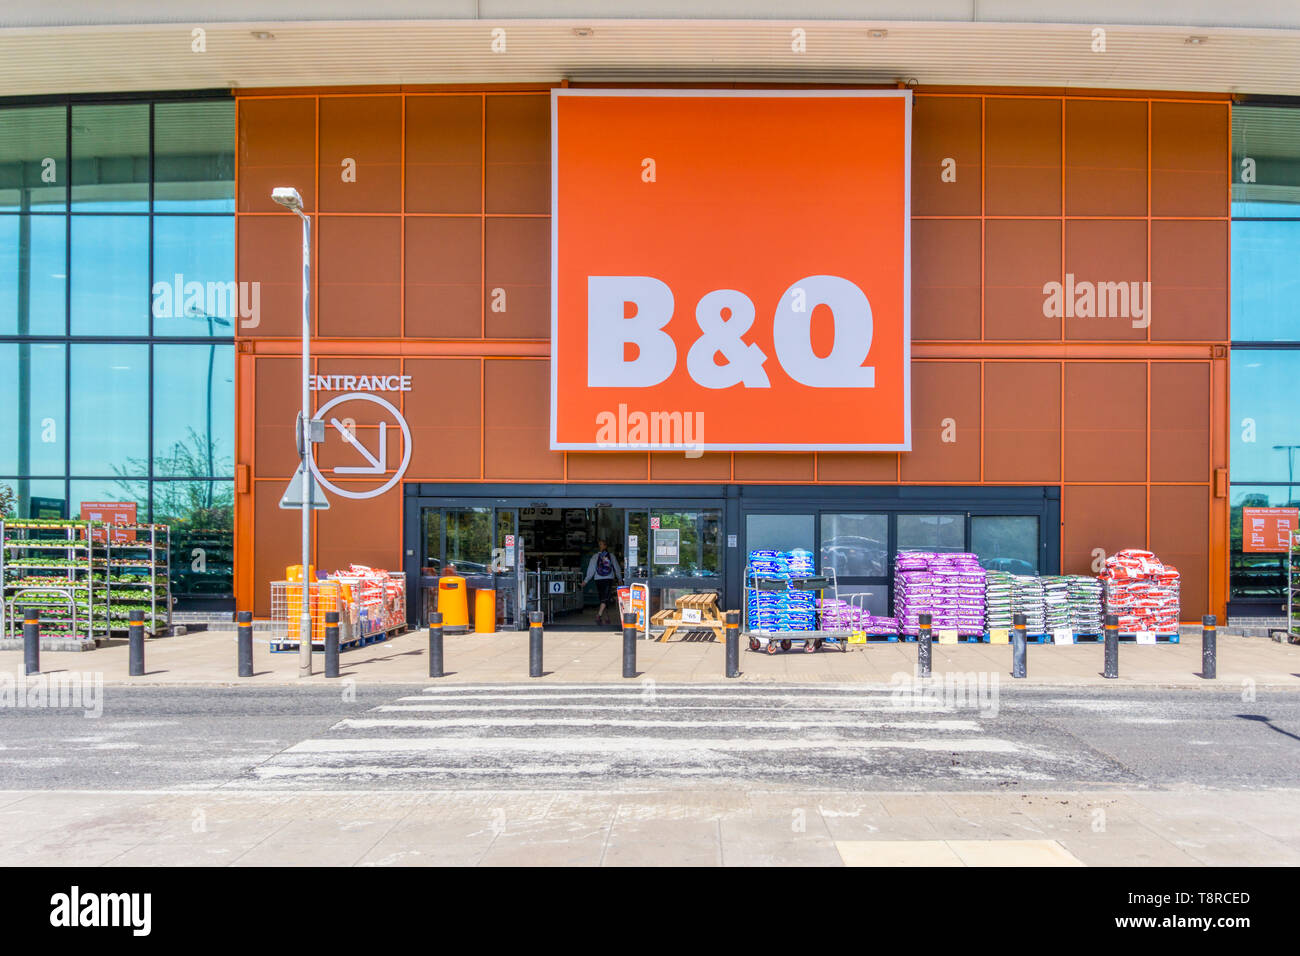 A large B&Q DIY and home improvement store at Bugsby's Way on the Greenwich Peninsula, London. Stock Photo